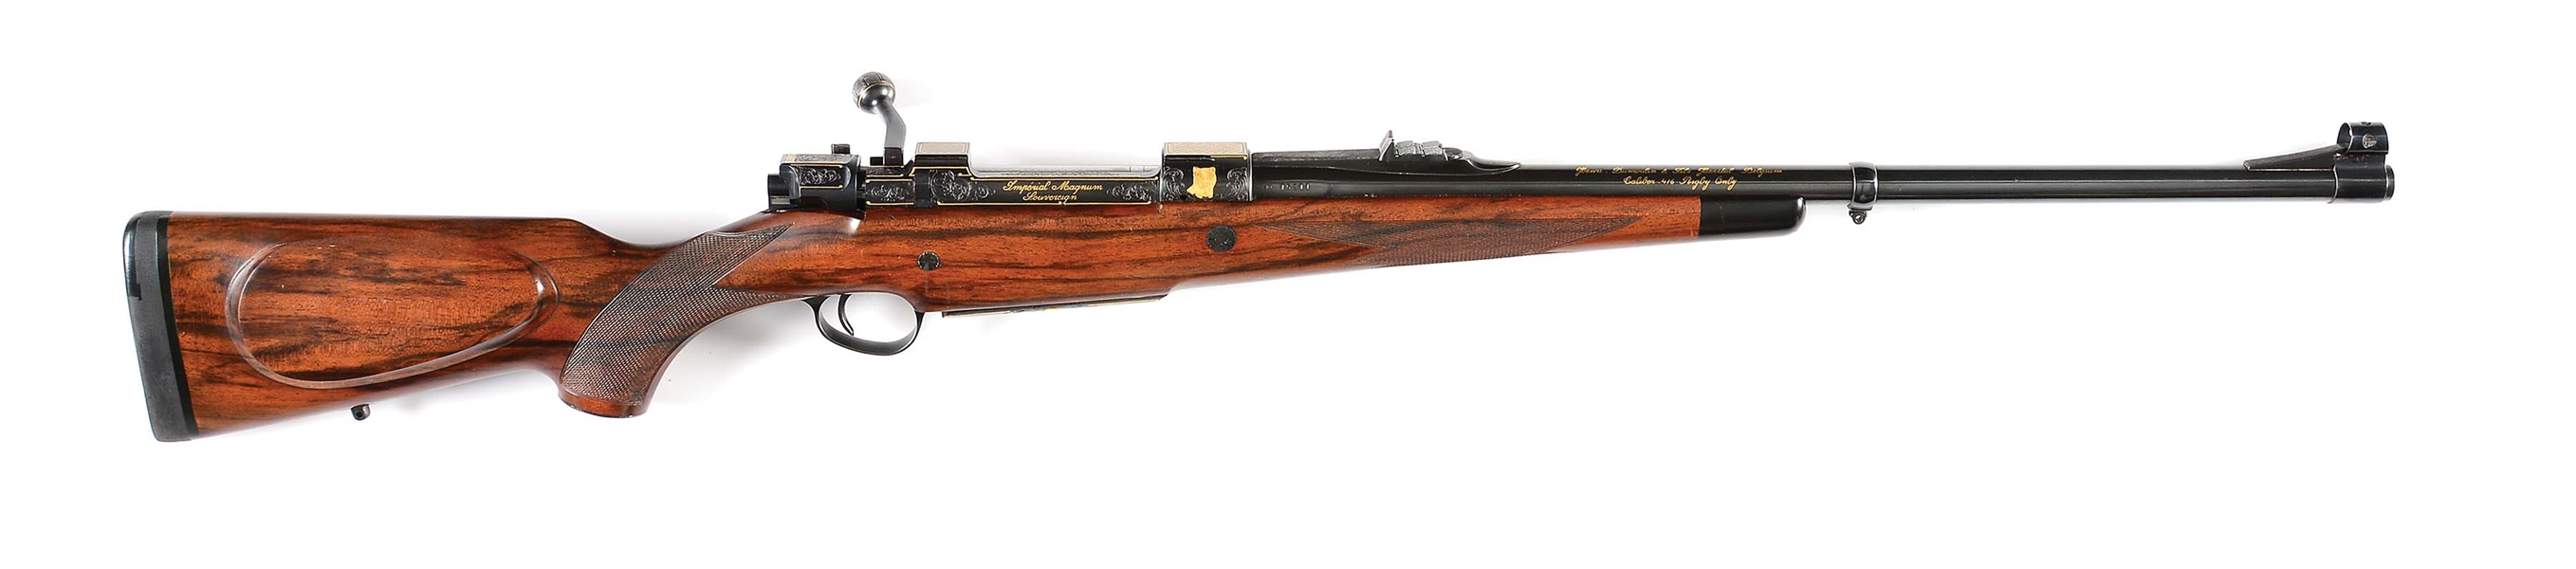 (M) DUMOULIN IMPERIAL MAGNUM SOVEREIGN BOLT ACTION RIFLE IN .416 RIGBY.